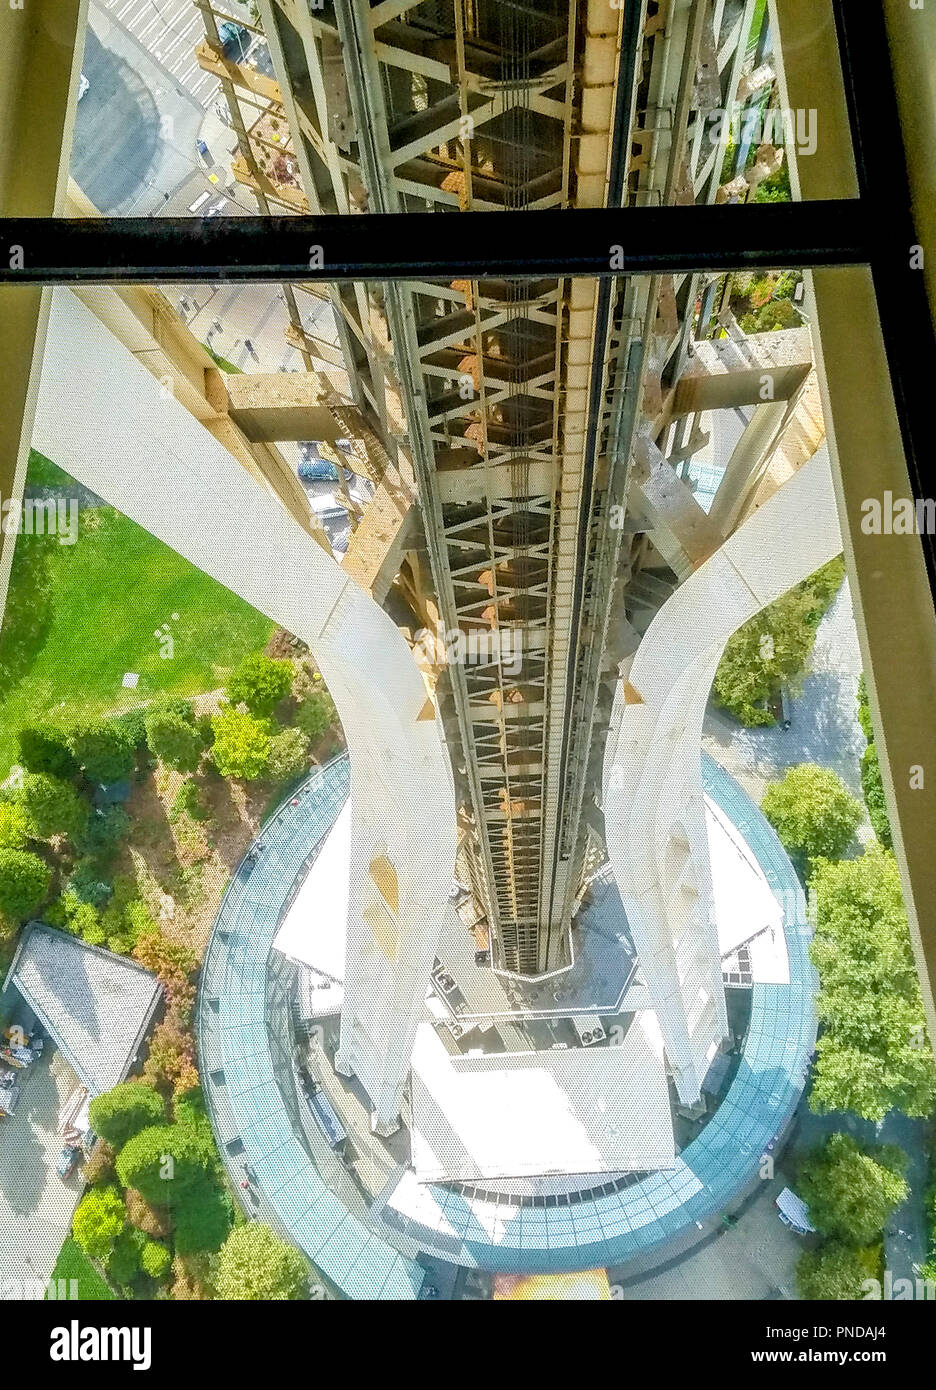 View of the elevator tower of the Seattle Space Needle from the rotating glass floor. This view was not possible before the renovation. Stock Photo